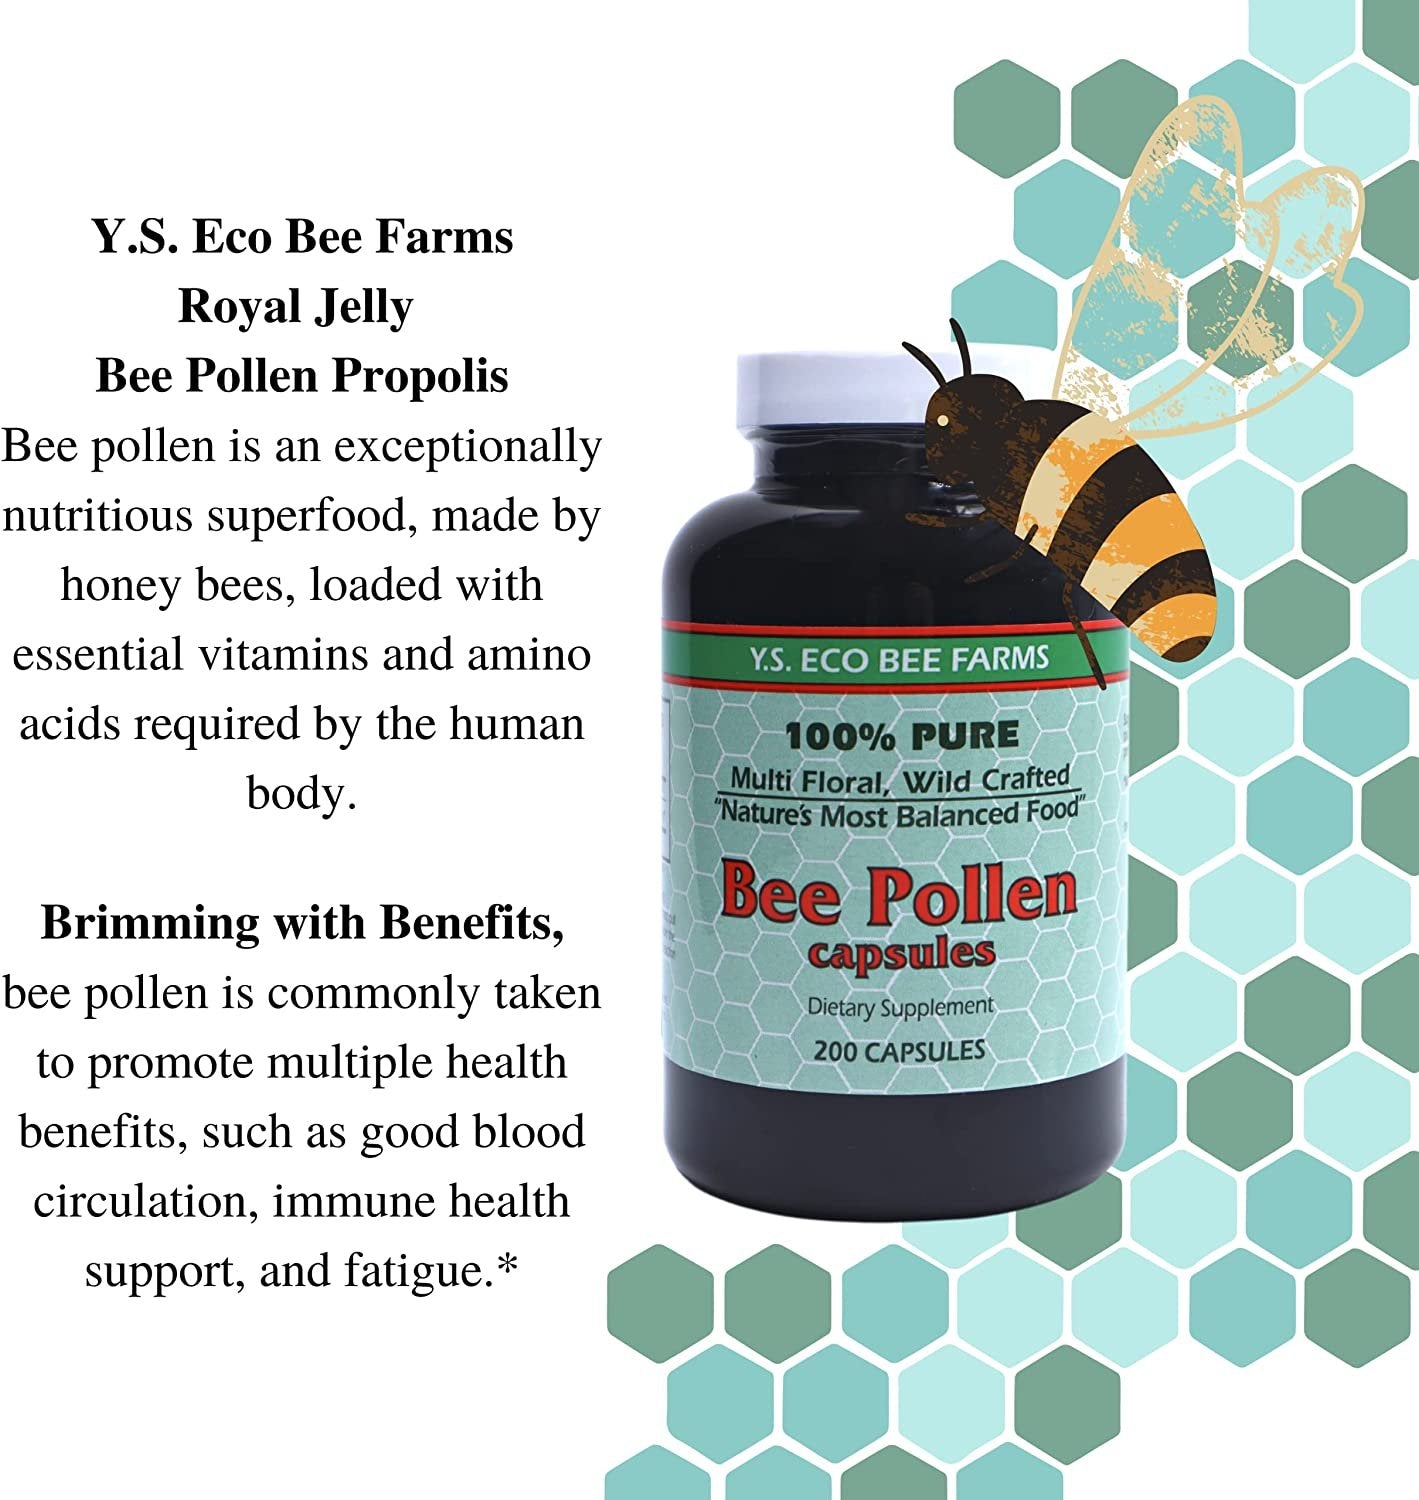 Y.S. Eco Bee Farms 100% Pure Multi Floral, Wild Crafted Bee Pollen Capsules - 2 Pack of 200 Count Bottles - Organic Bee Pollen Vitamin Supplements for Optimal Health and Wellness